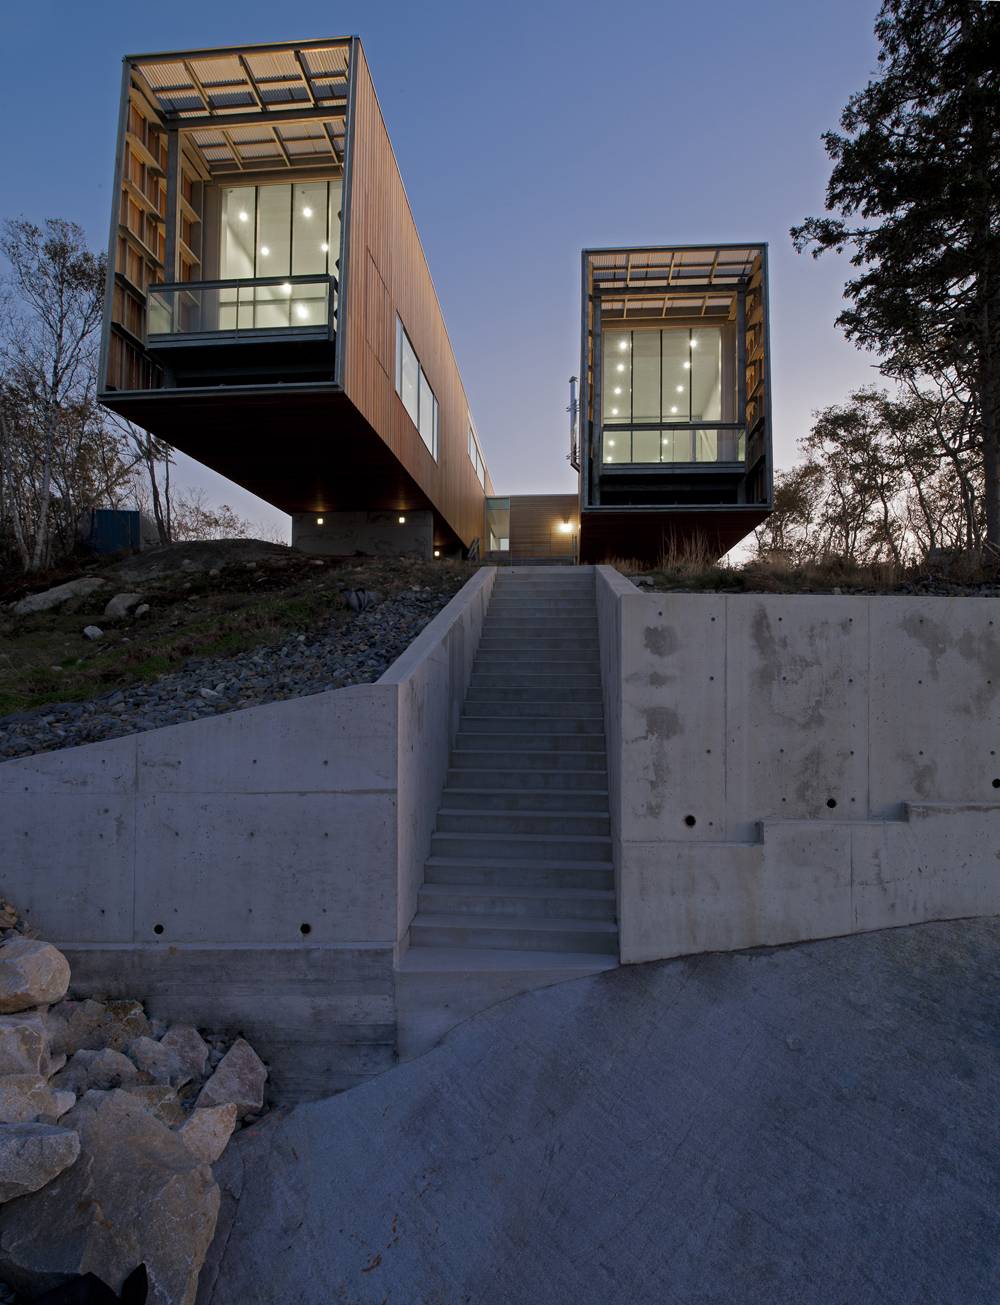 Concrete Staircase Two Stunning Concrete Staircase To The Two Hulls House With Wooden Wall And Flat Roof Near Glass Windows Dream Homes Stunning Cantilevered Home With Earthy Tones Of Minimalist Interior Designs